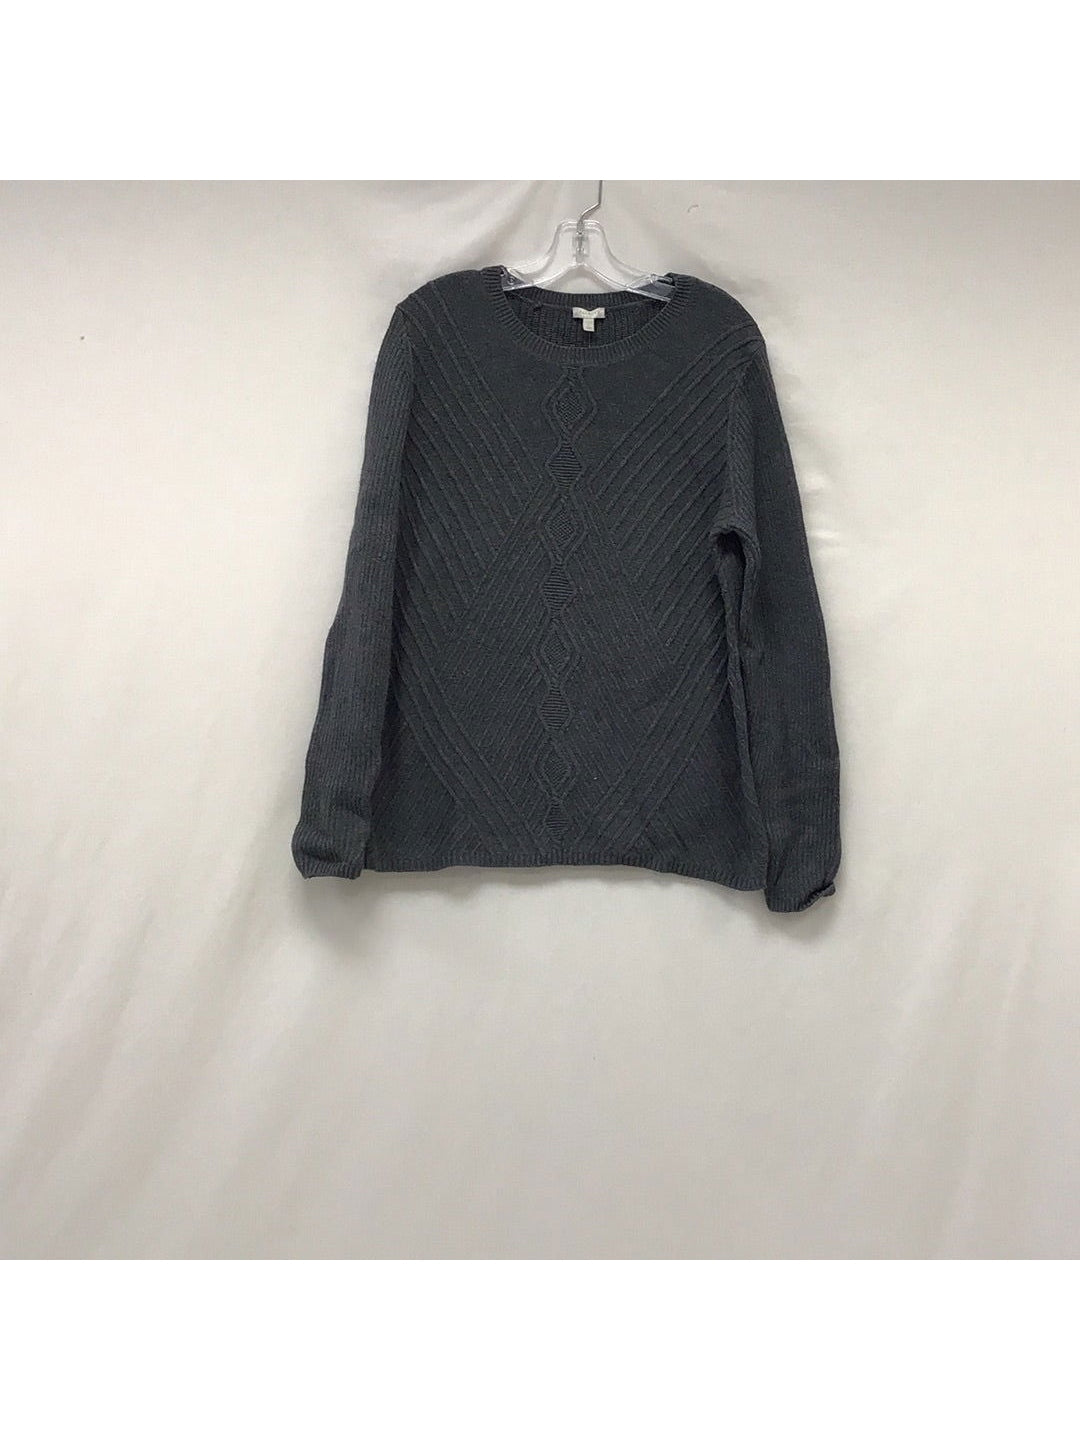 Talbots Gray Long Sleeve Knit Women's  Sweater size large - The Kennedy Collective Thrift - 